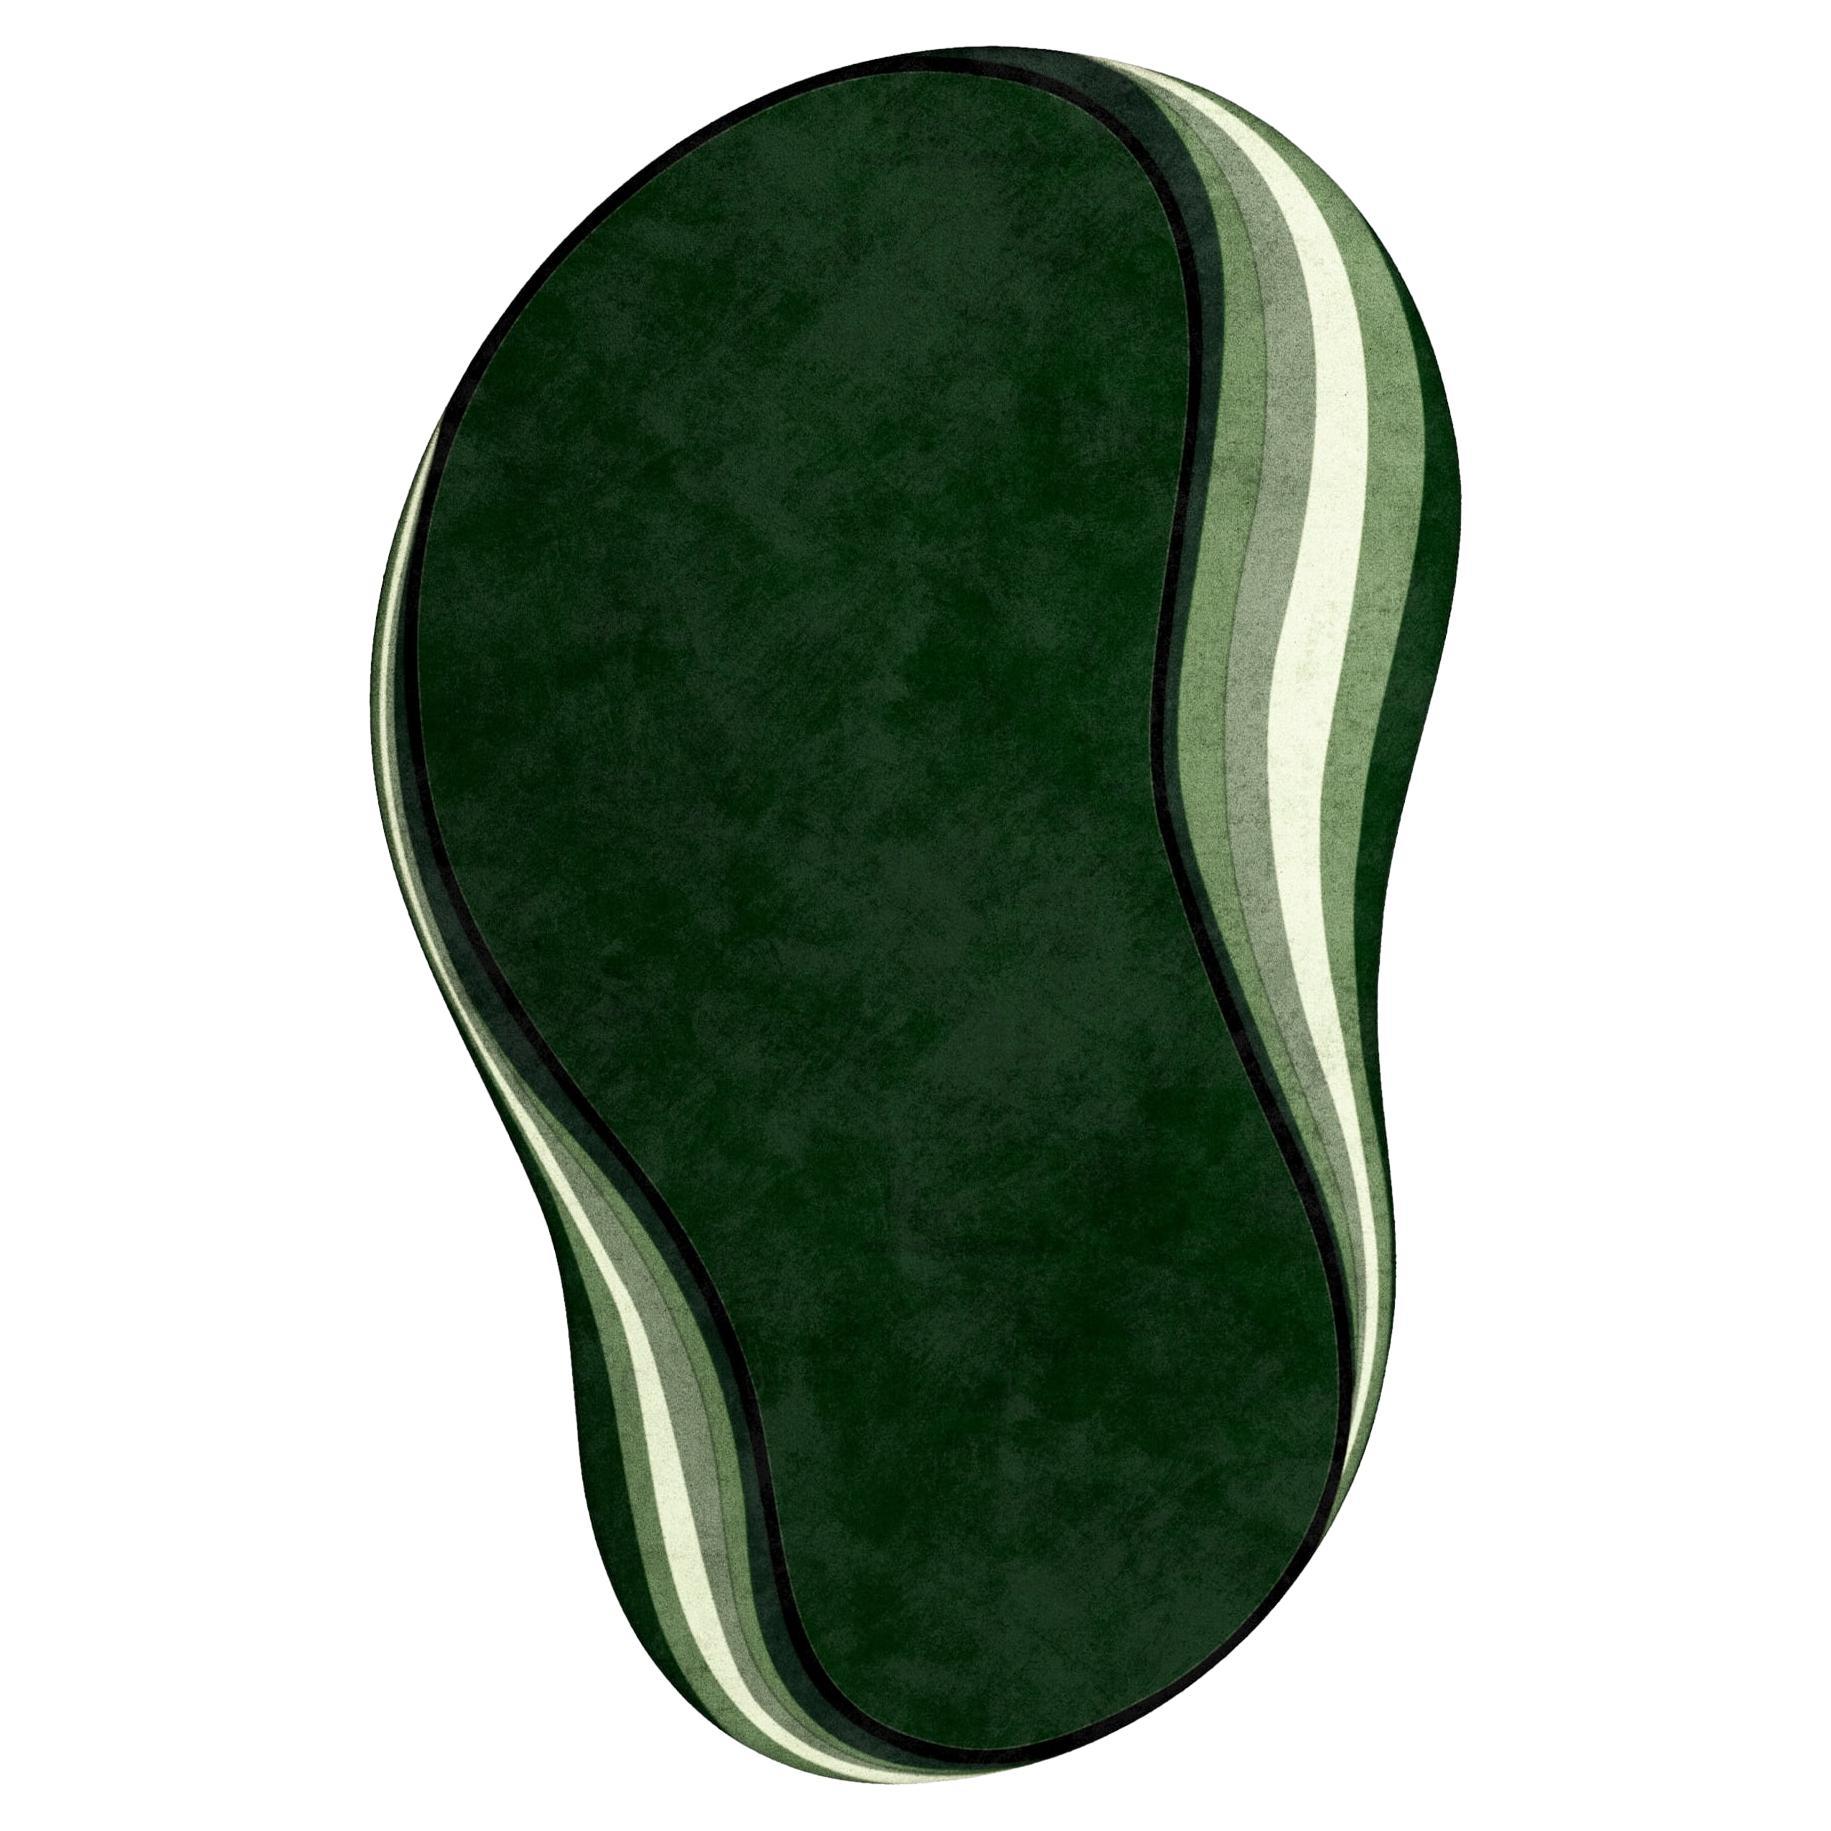 Modern Eclectic Style Green Oval Shape Rug Hand-Tufted 